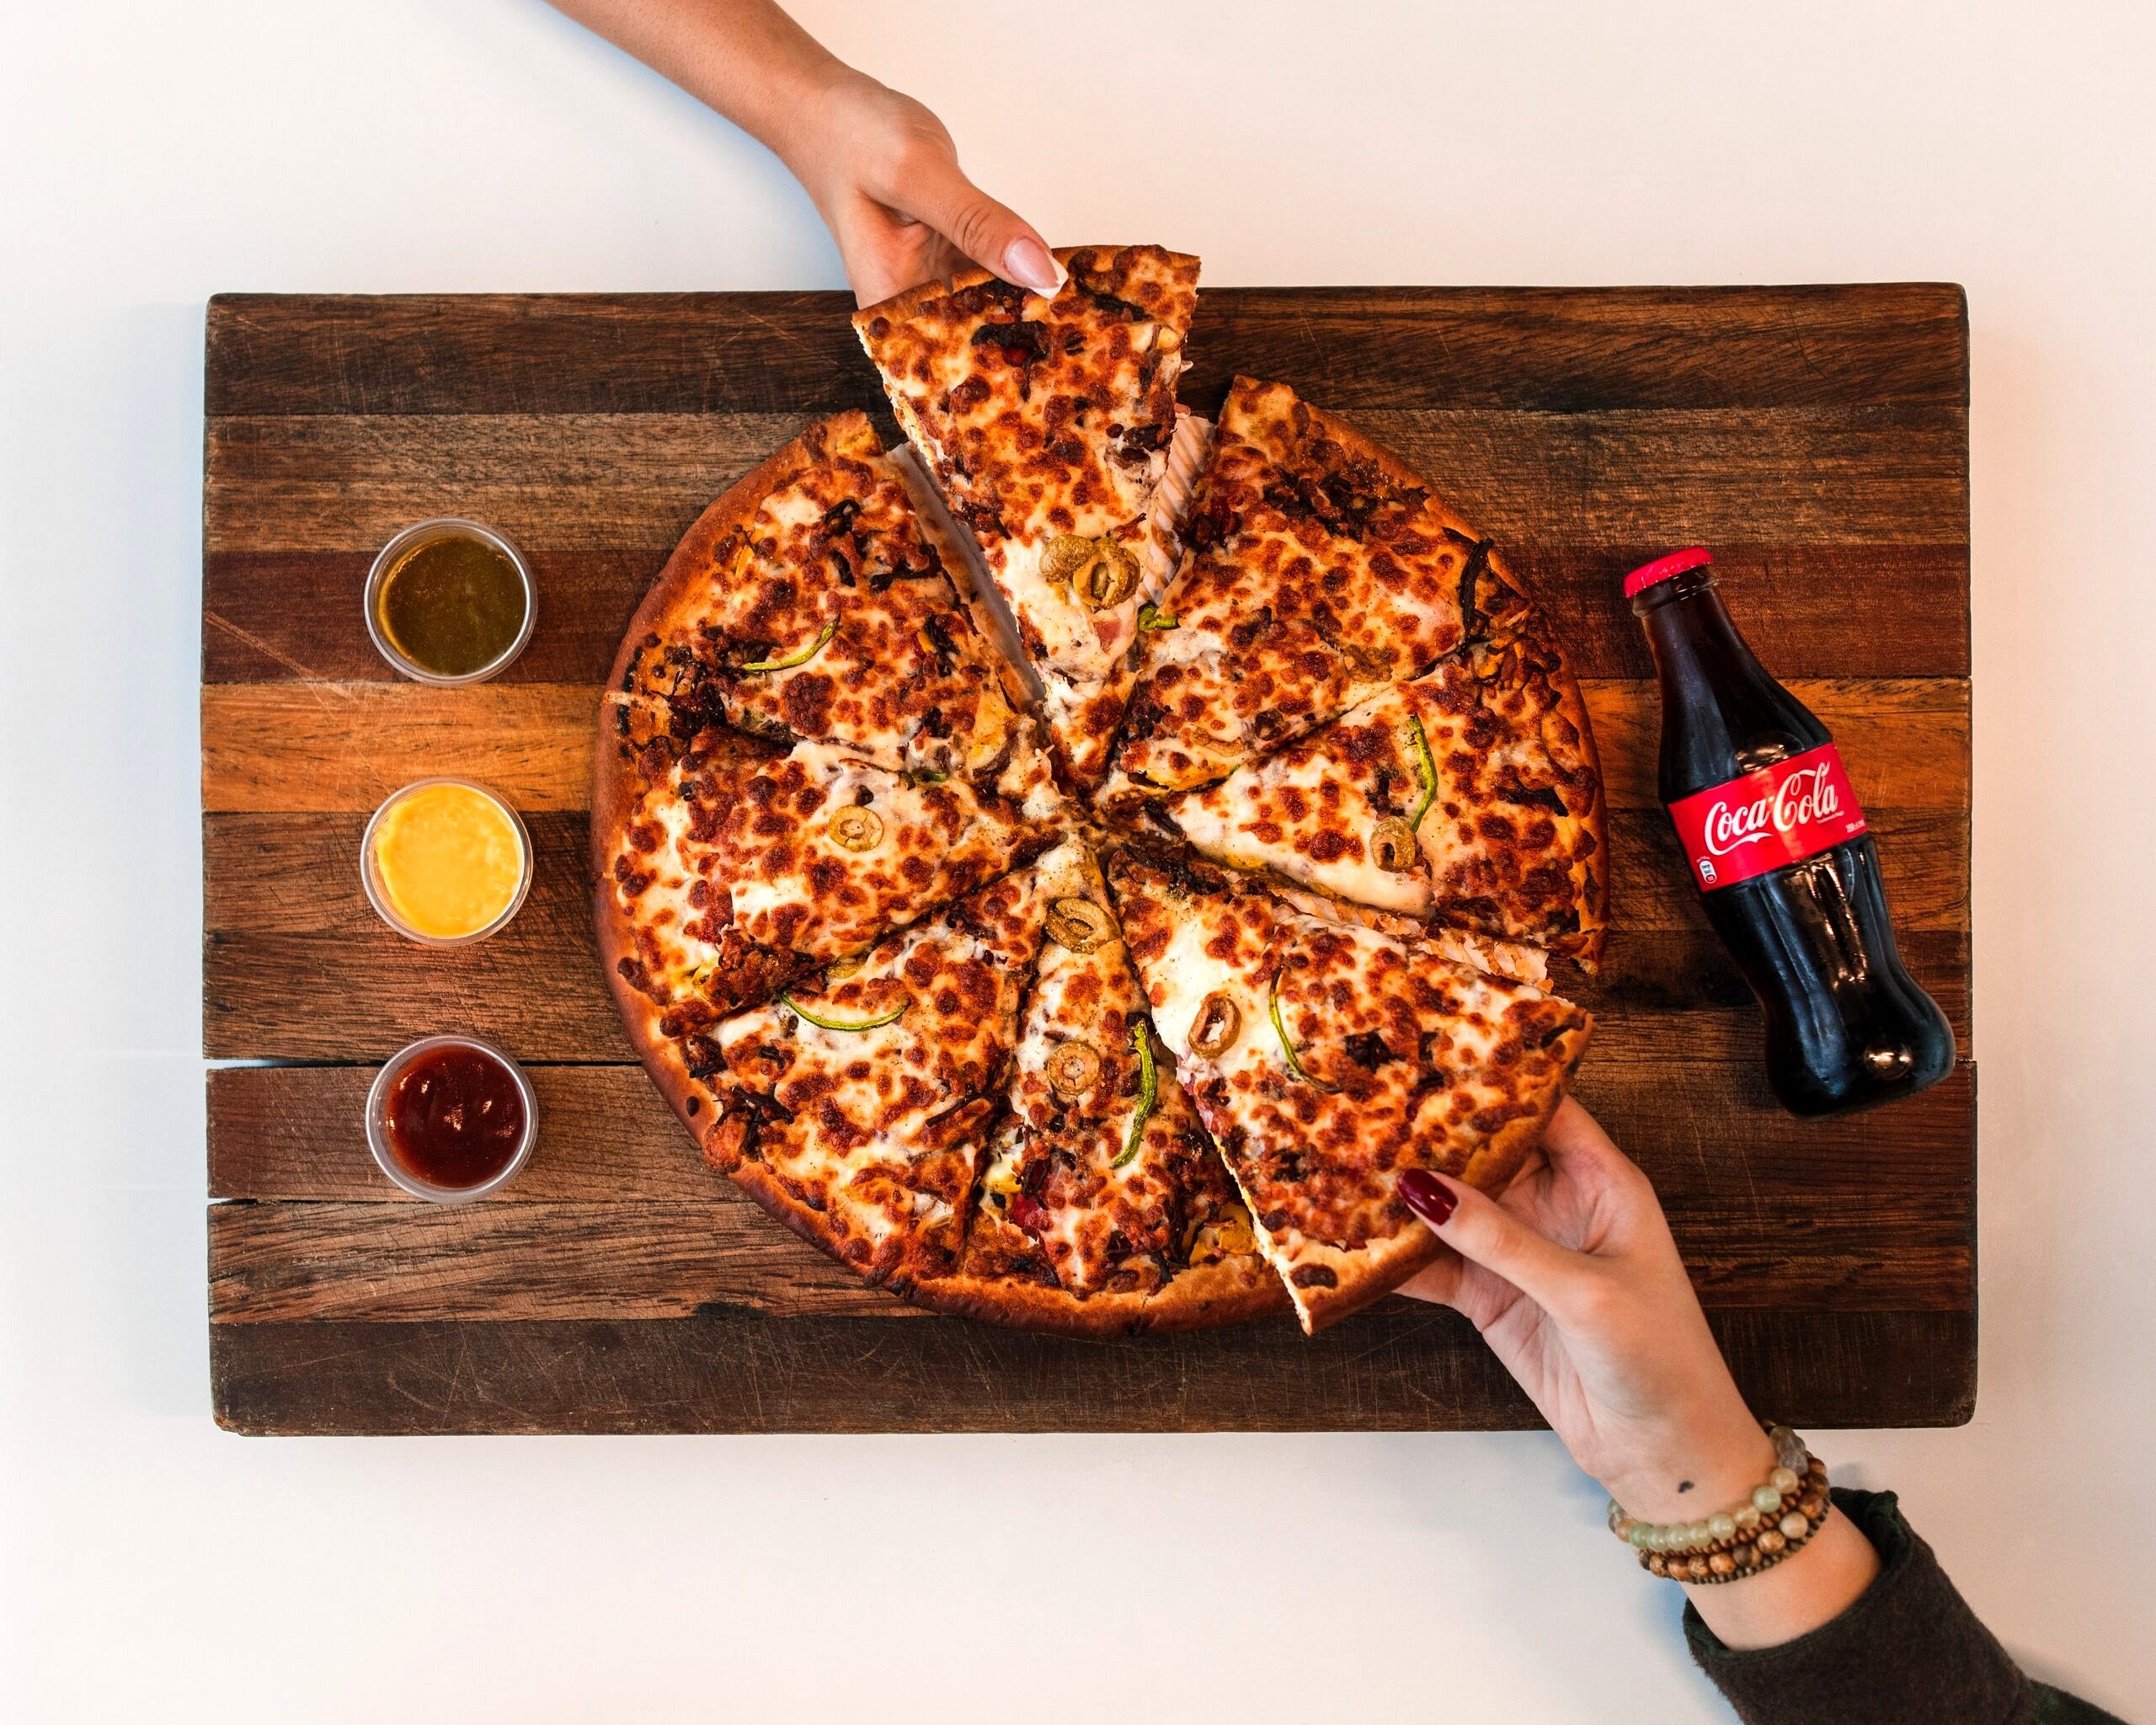 Birds eye view of a pizza being shared.